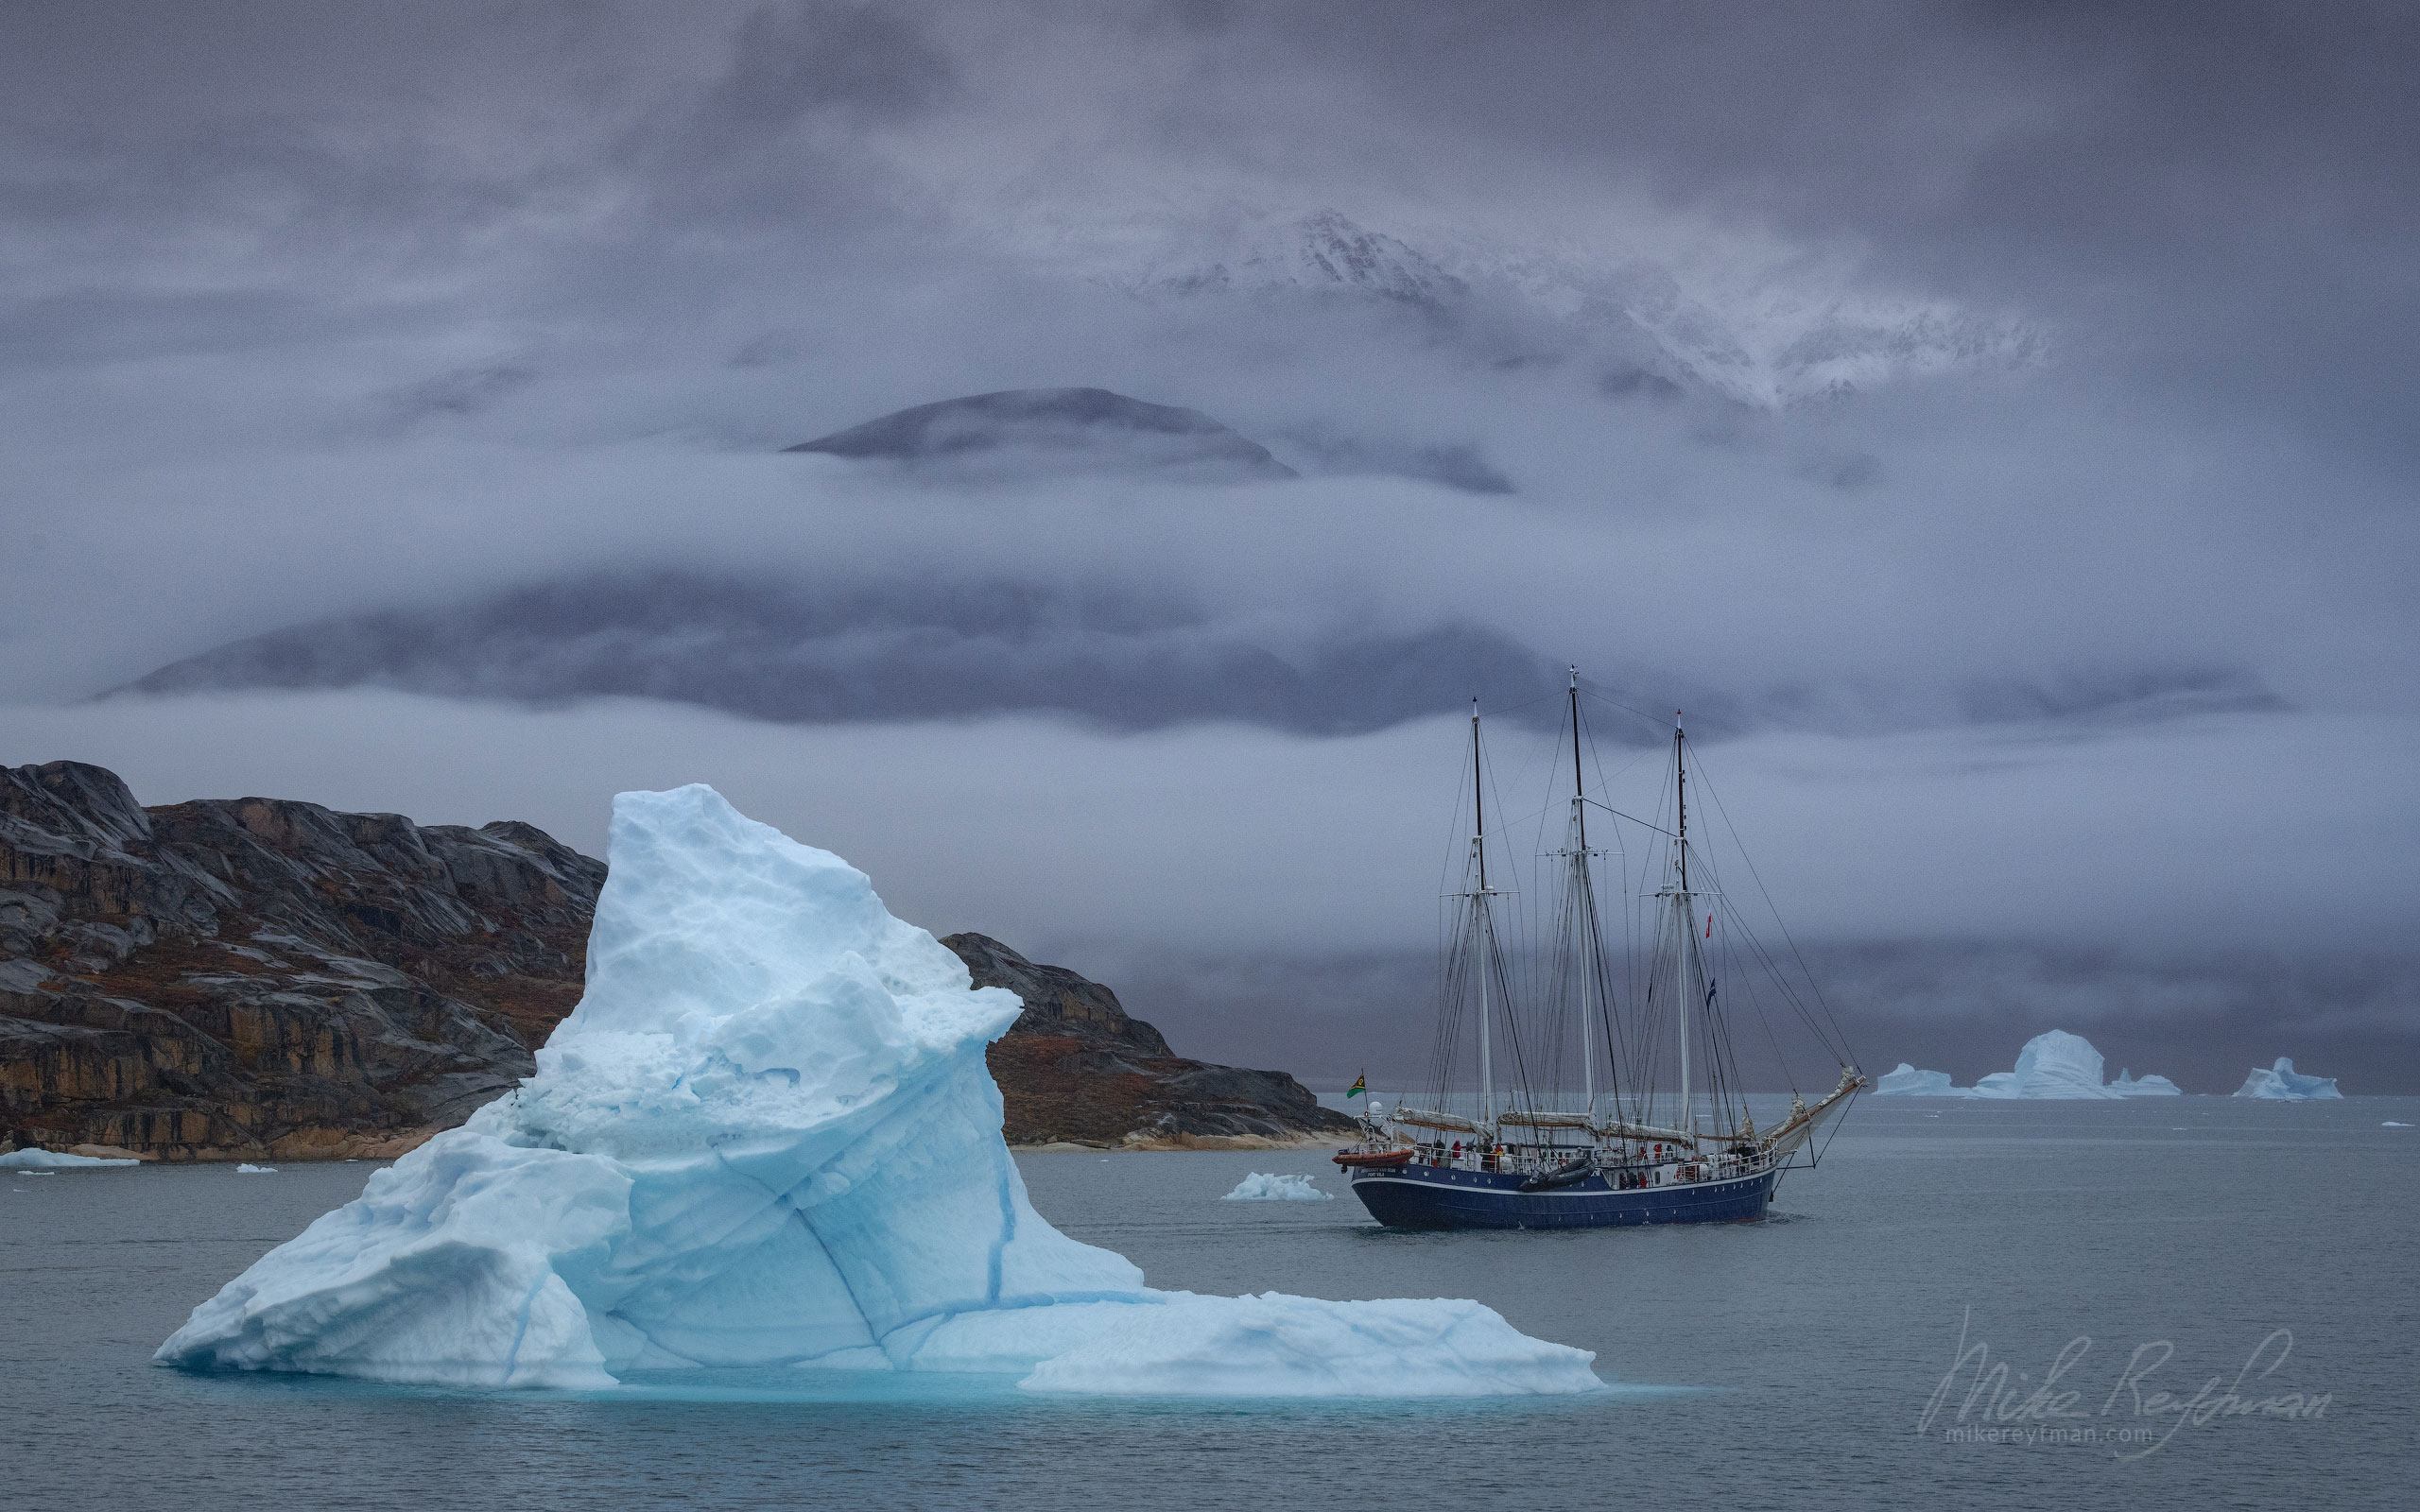 Three-masted bark in Scoresby Sund. Greenland. 022-GR-SC_50B8339 - The Scoresby Sund fjord system and the settlement of Ittoqqortoormiit. East Greenland. - Mike Reyfman Photography